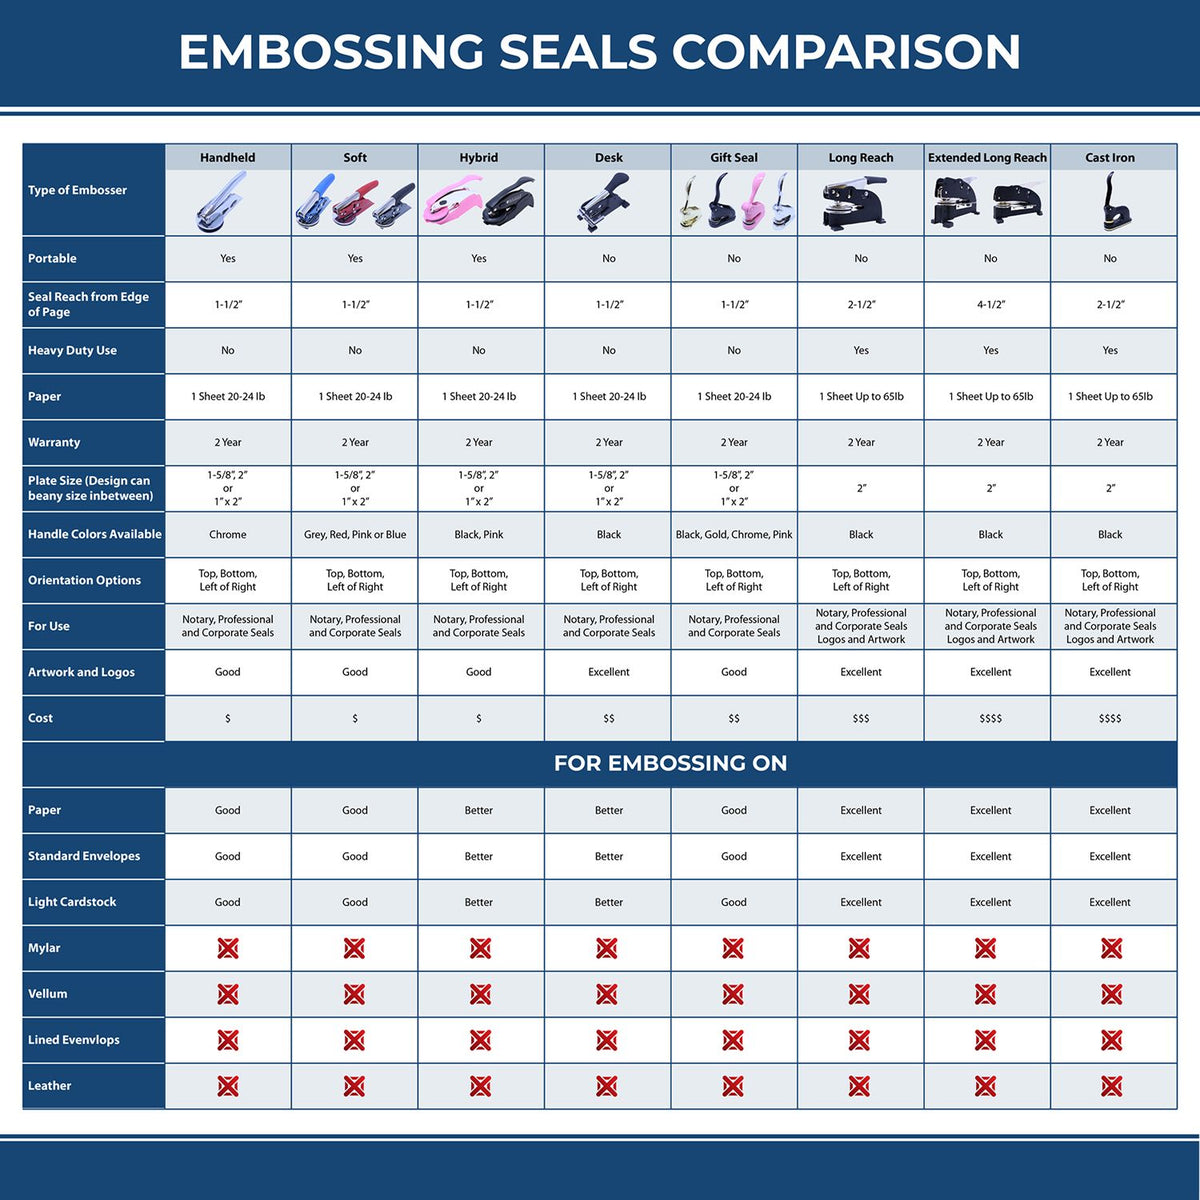 A comparison chart for the different types of mount models available for the Mississippi Desk Architect Embossing Seal.